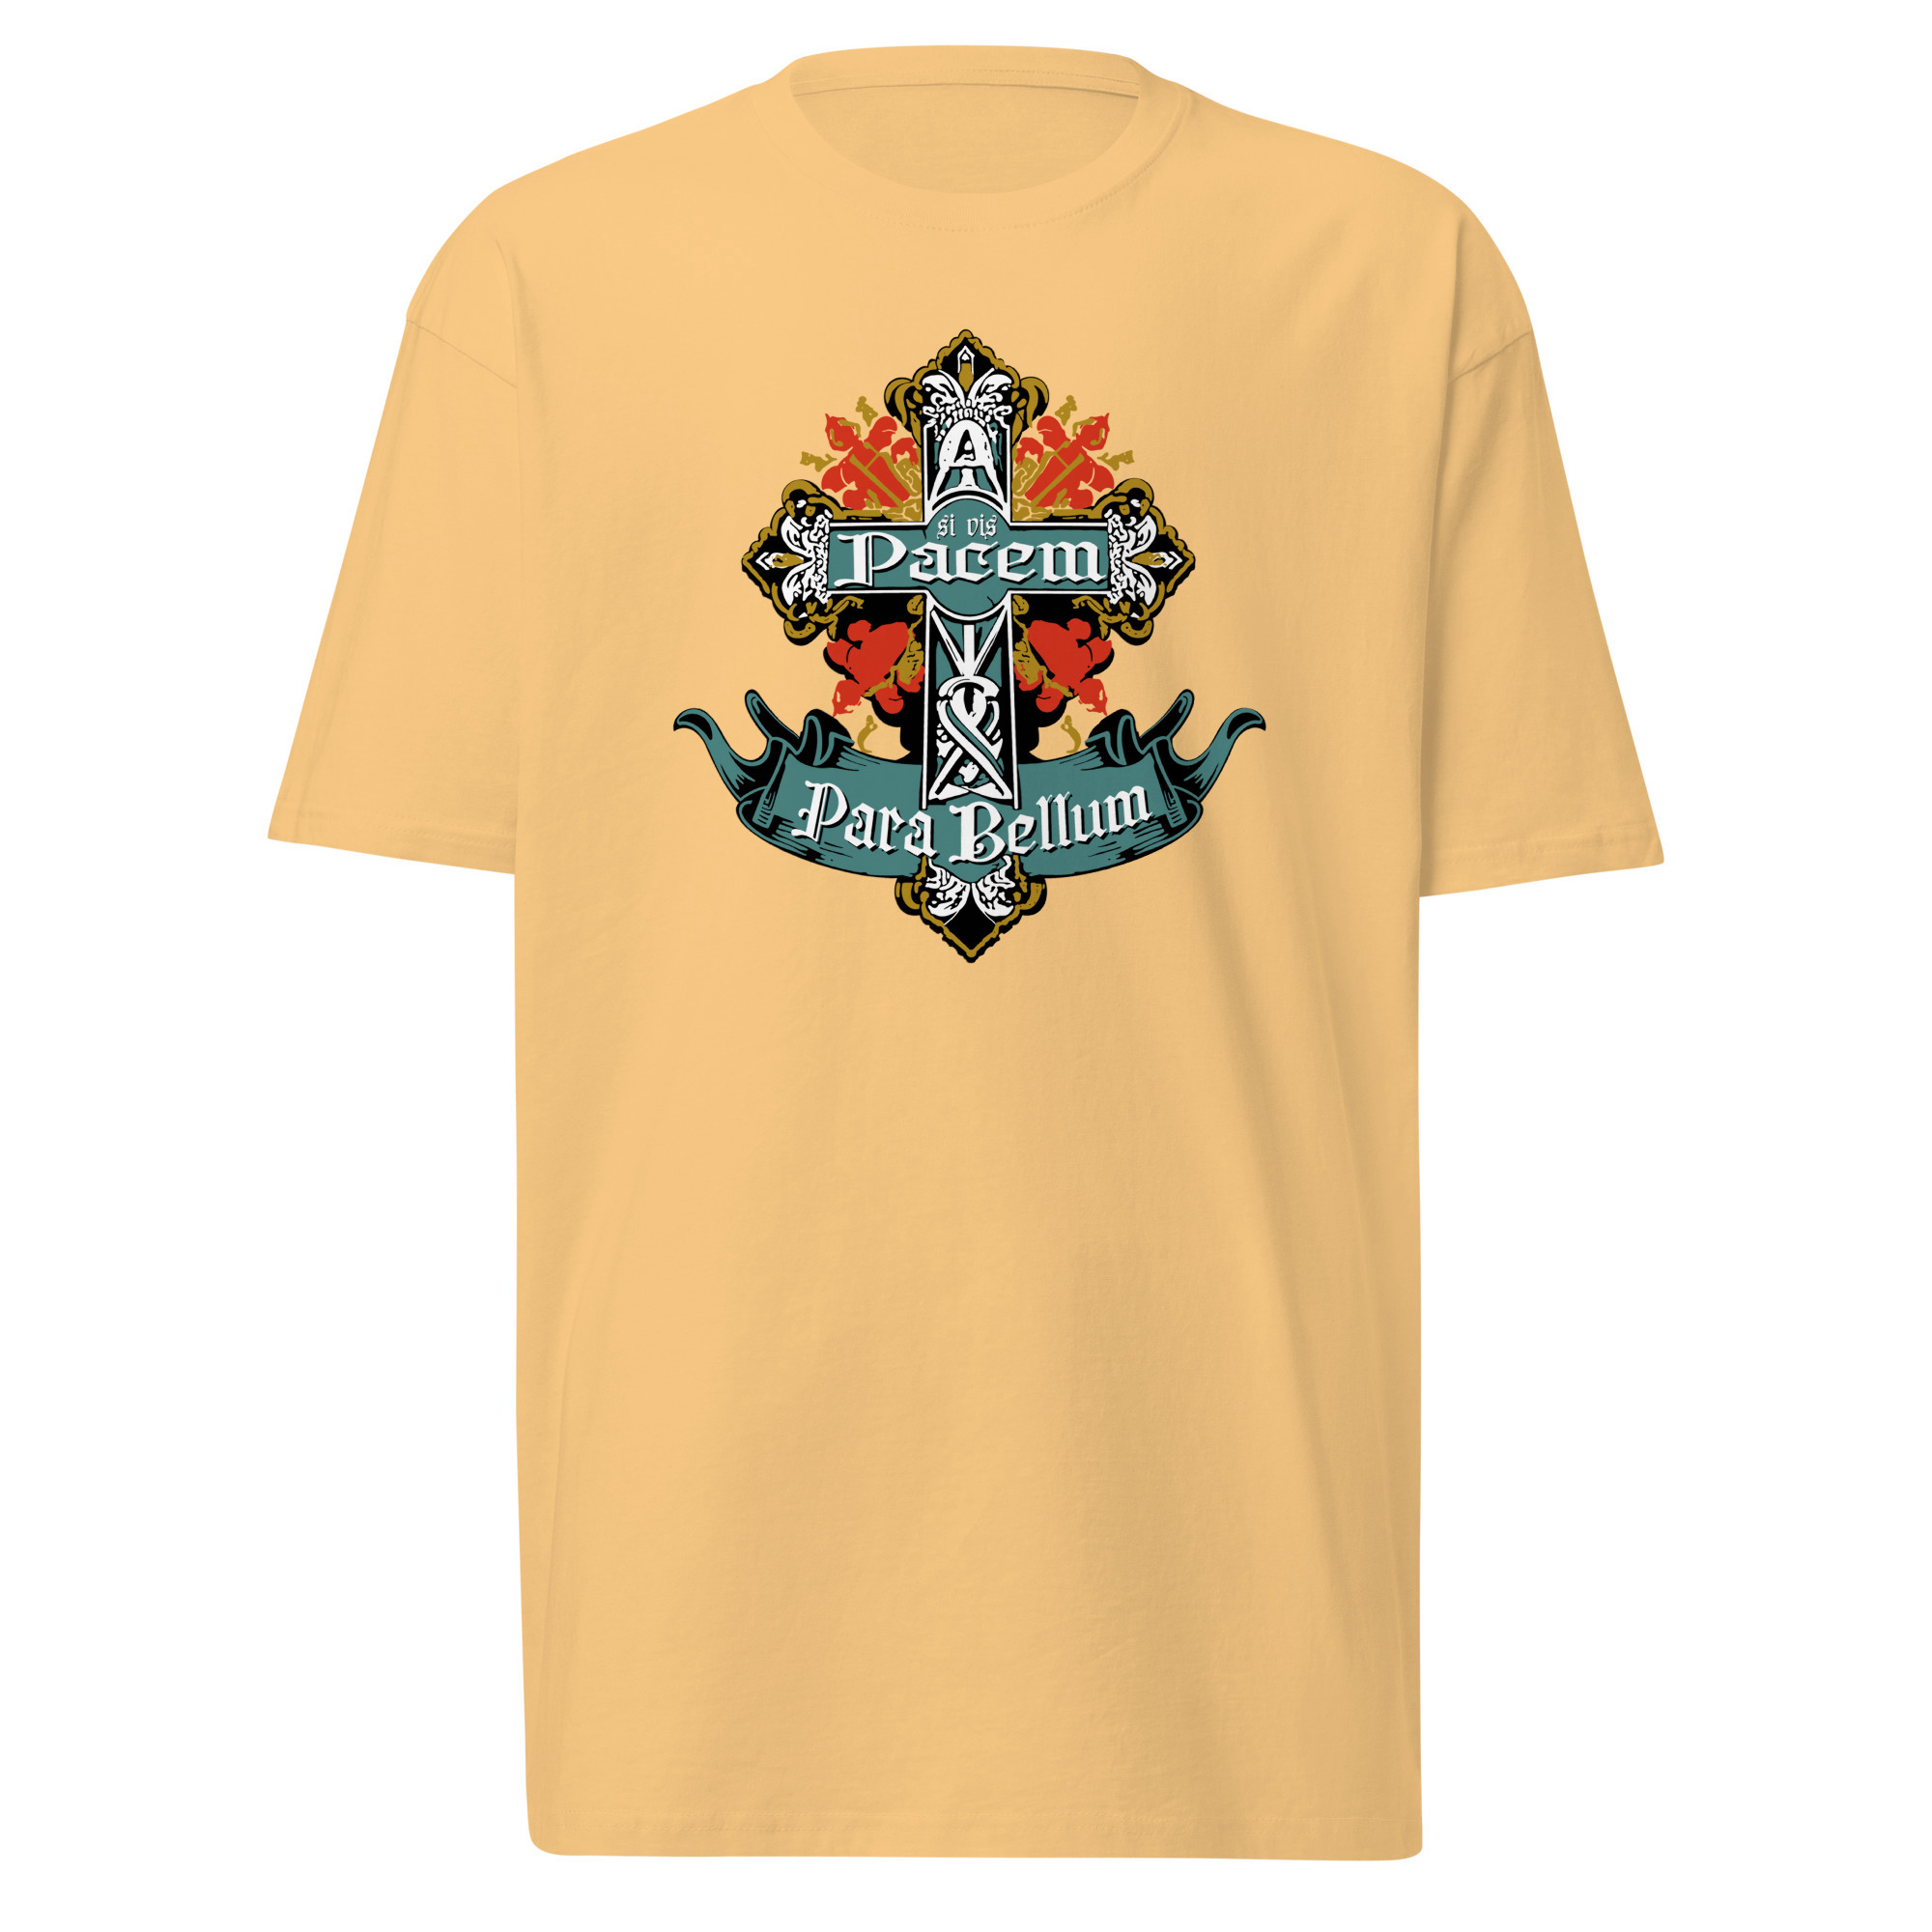 If You Want Peace, Prepare For War T-Shirt - Vintage Gold / L